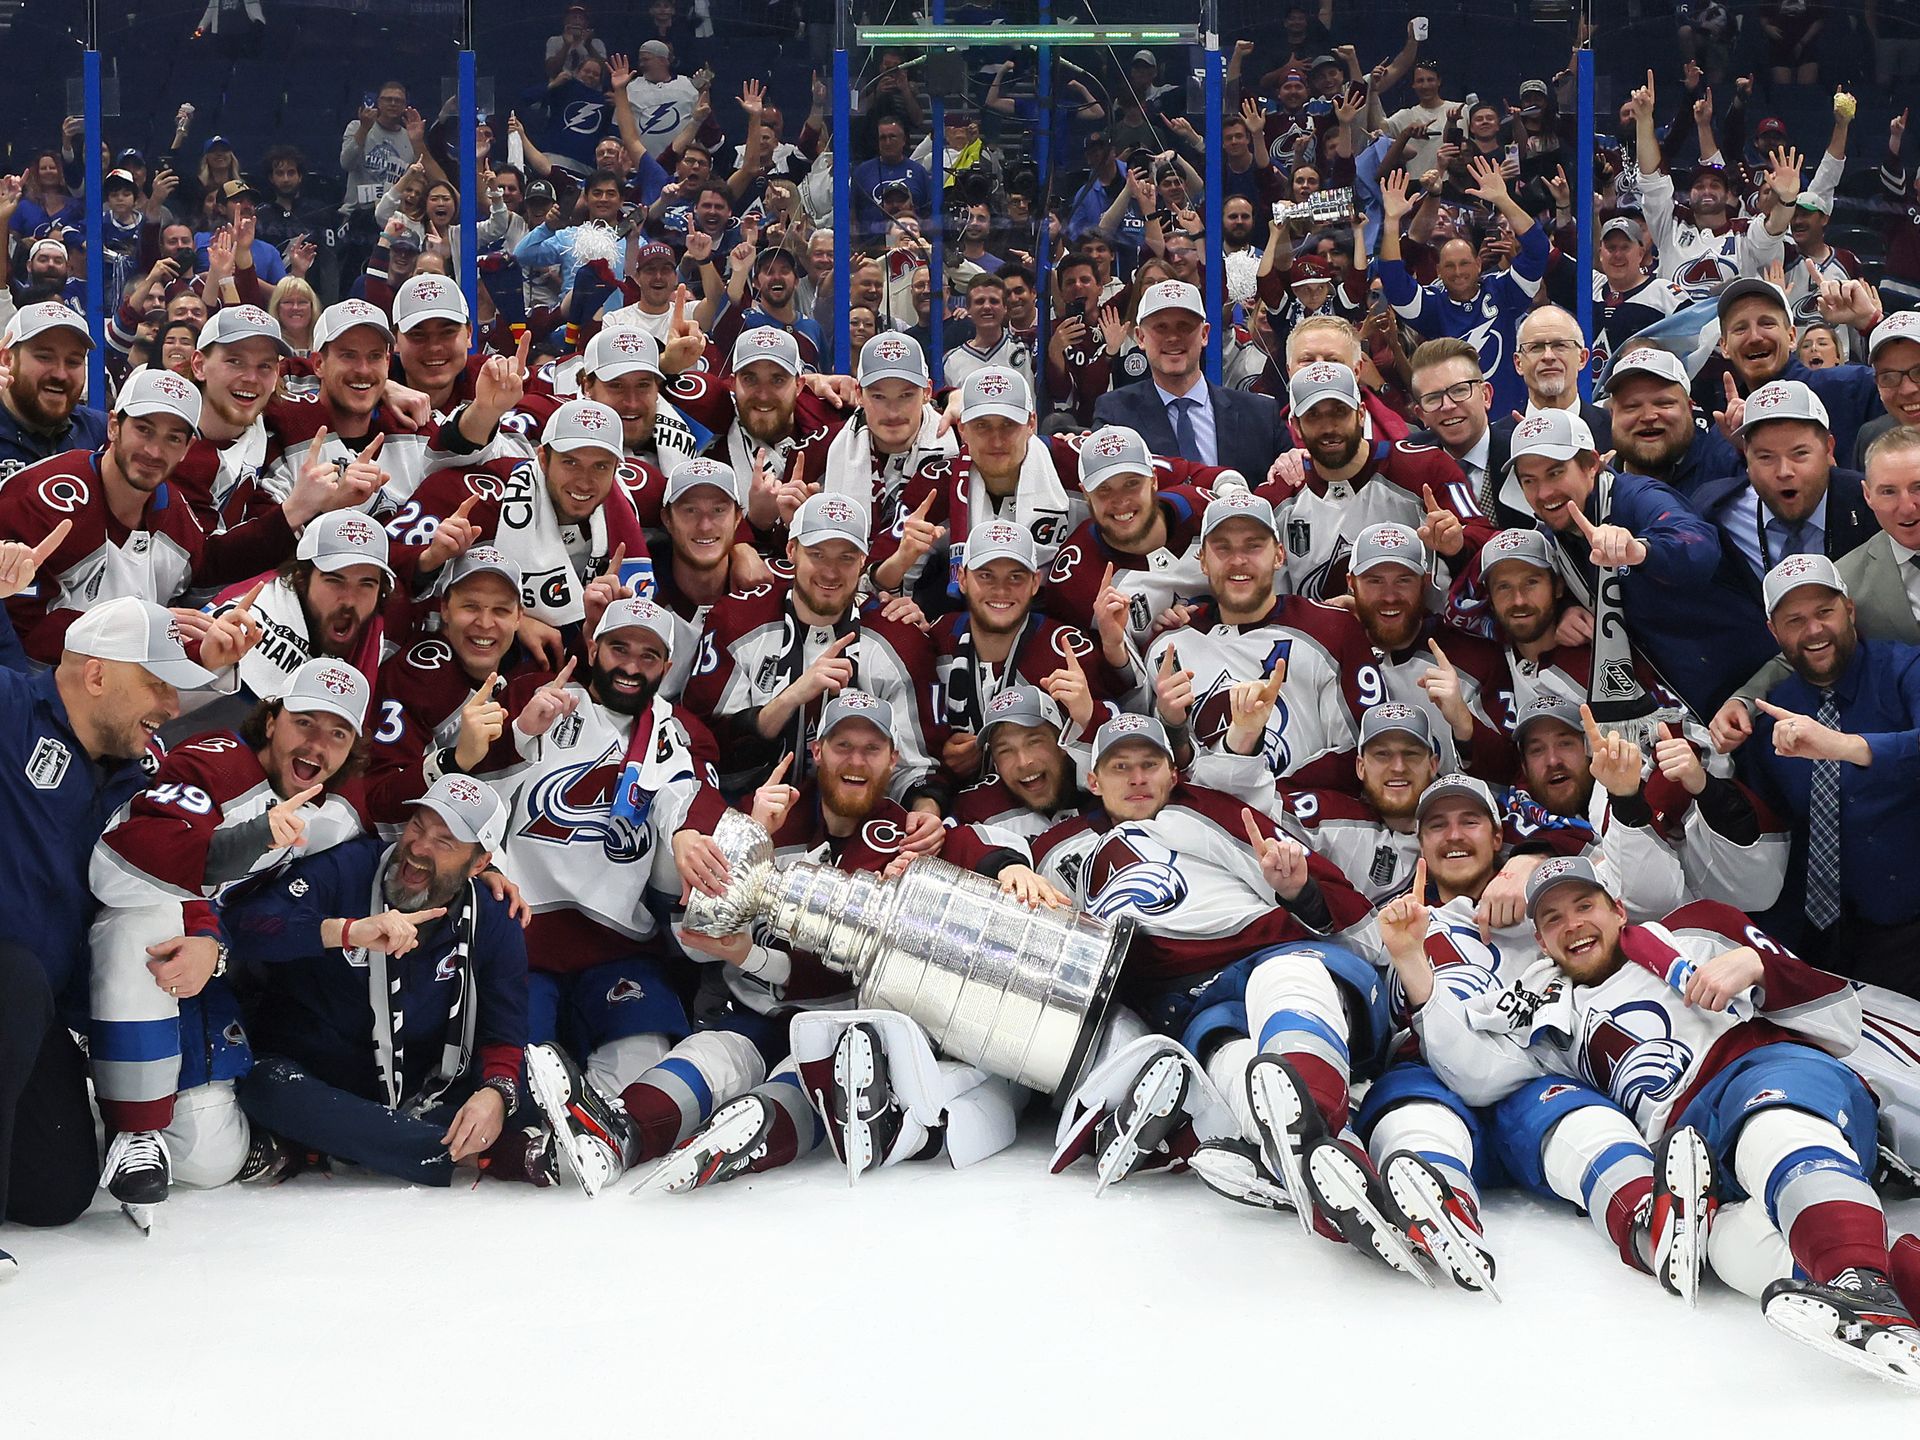 2022 Stanley Cup Champions Panoramic Picture - Colorado Avalanche